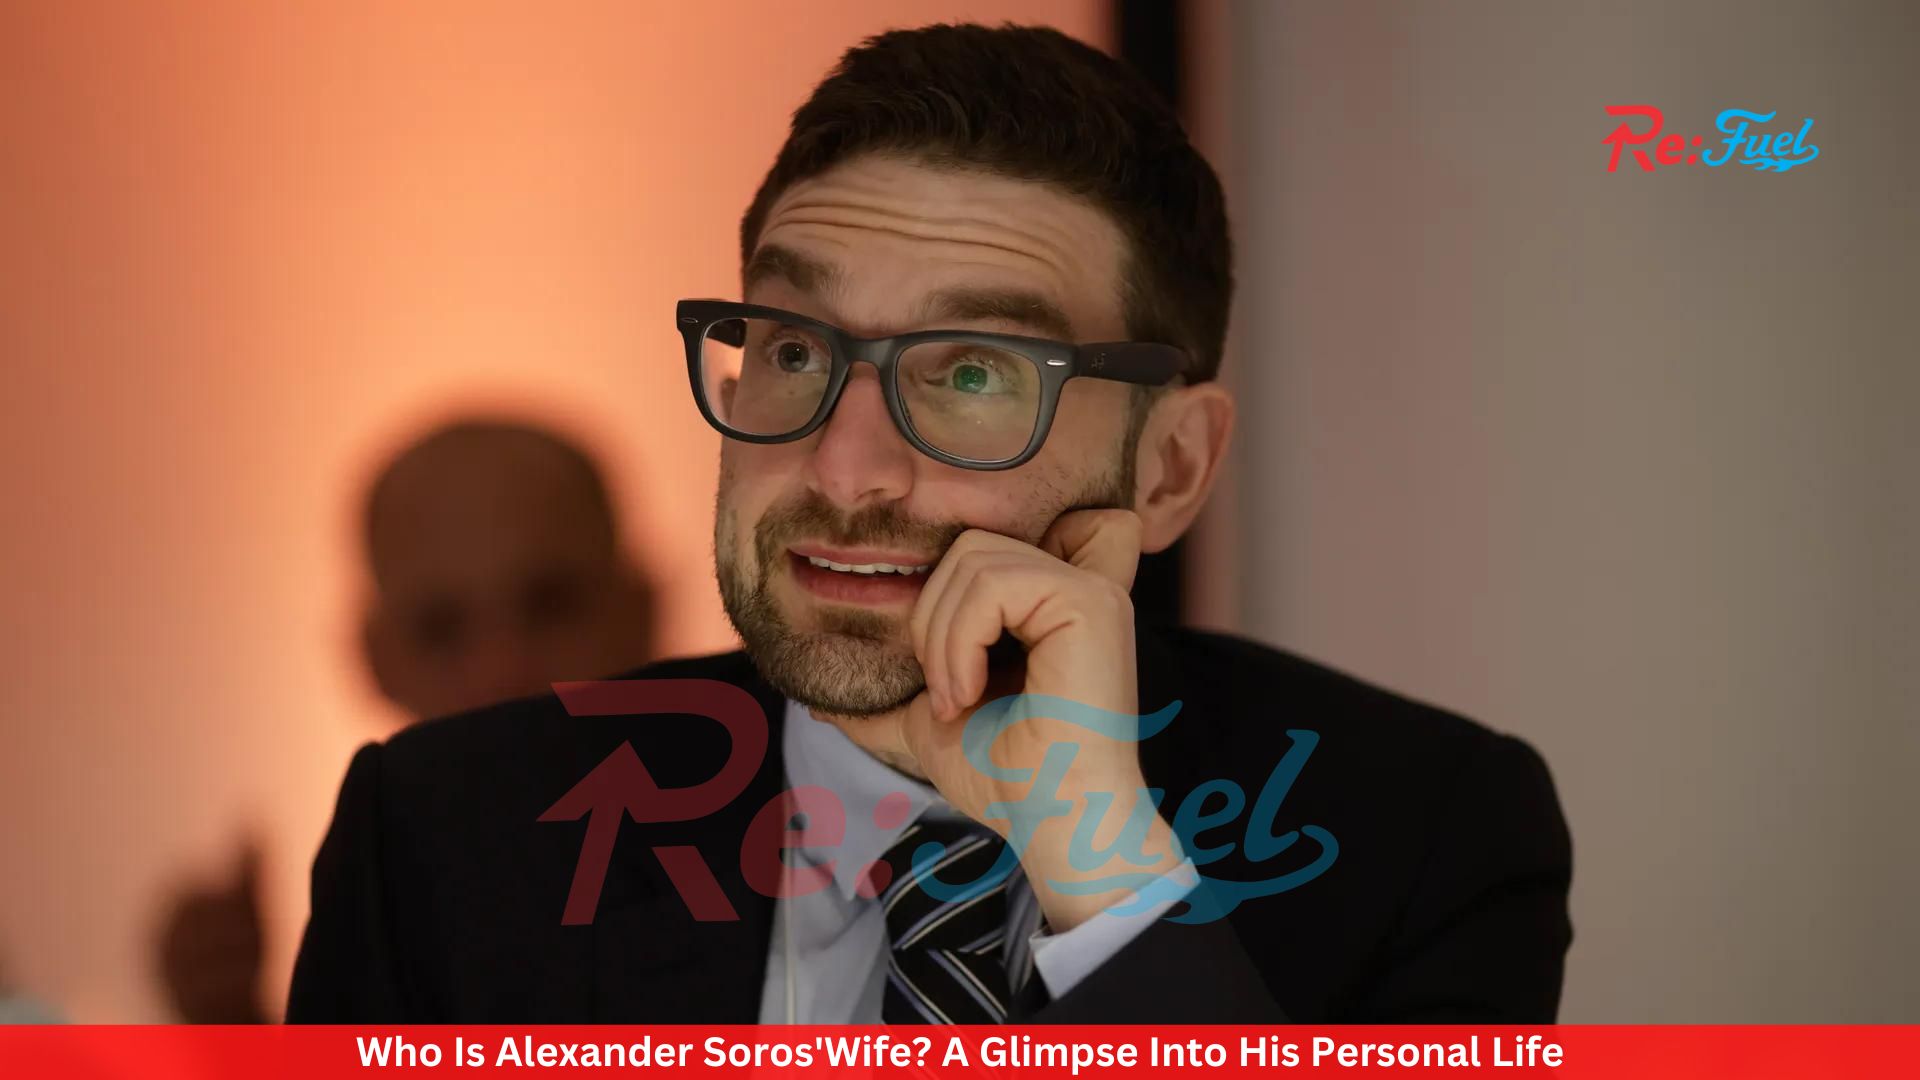 Who Is Alexander Soros'Wife? A Glimpse Into His Personal Life